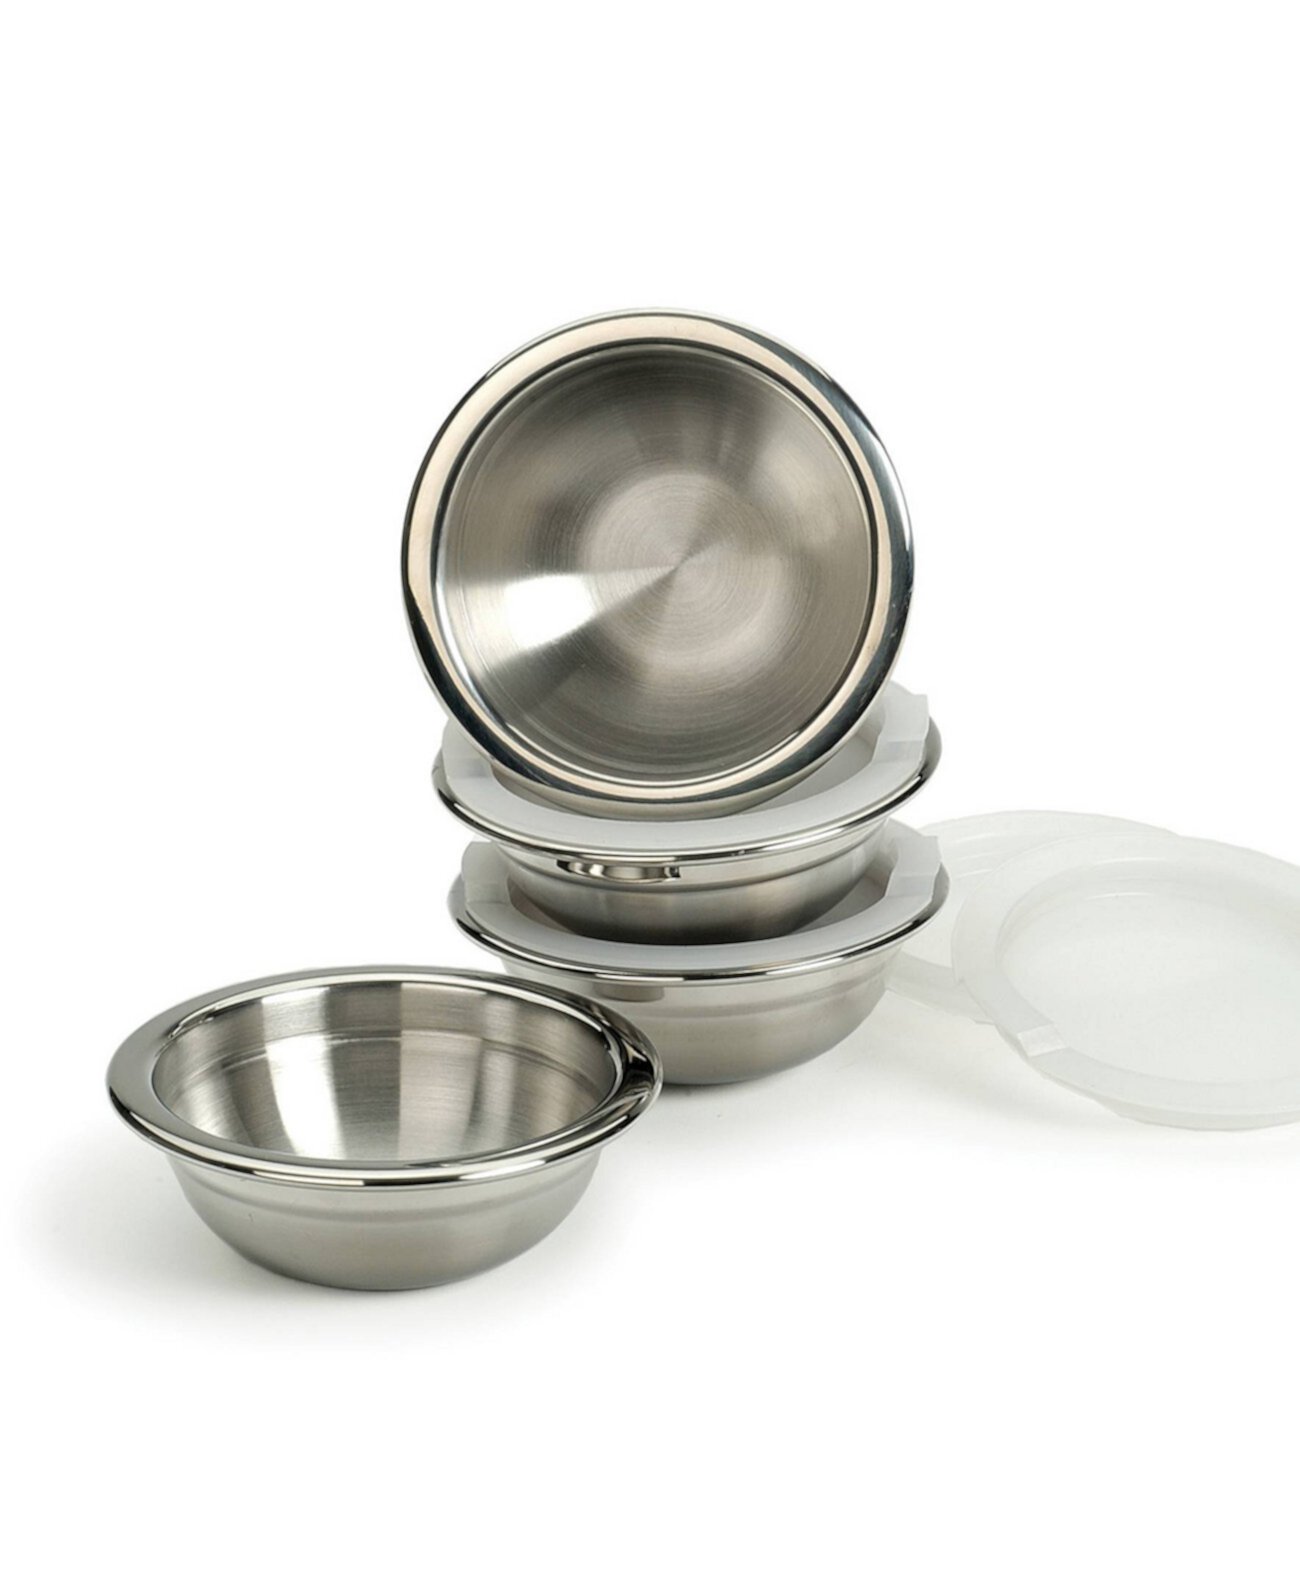 Endurance Stainless Steel 4 Piece 1 Cup Prep Bowls With Plastic Lid Set RSVP International